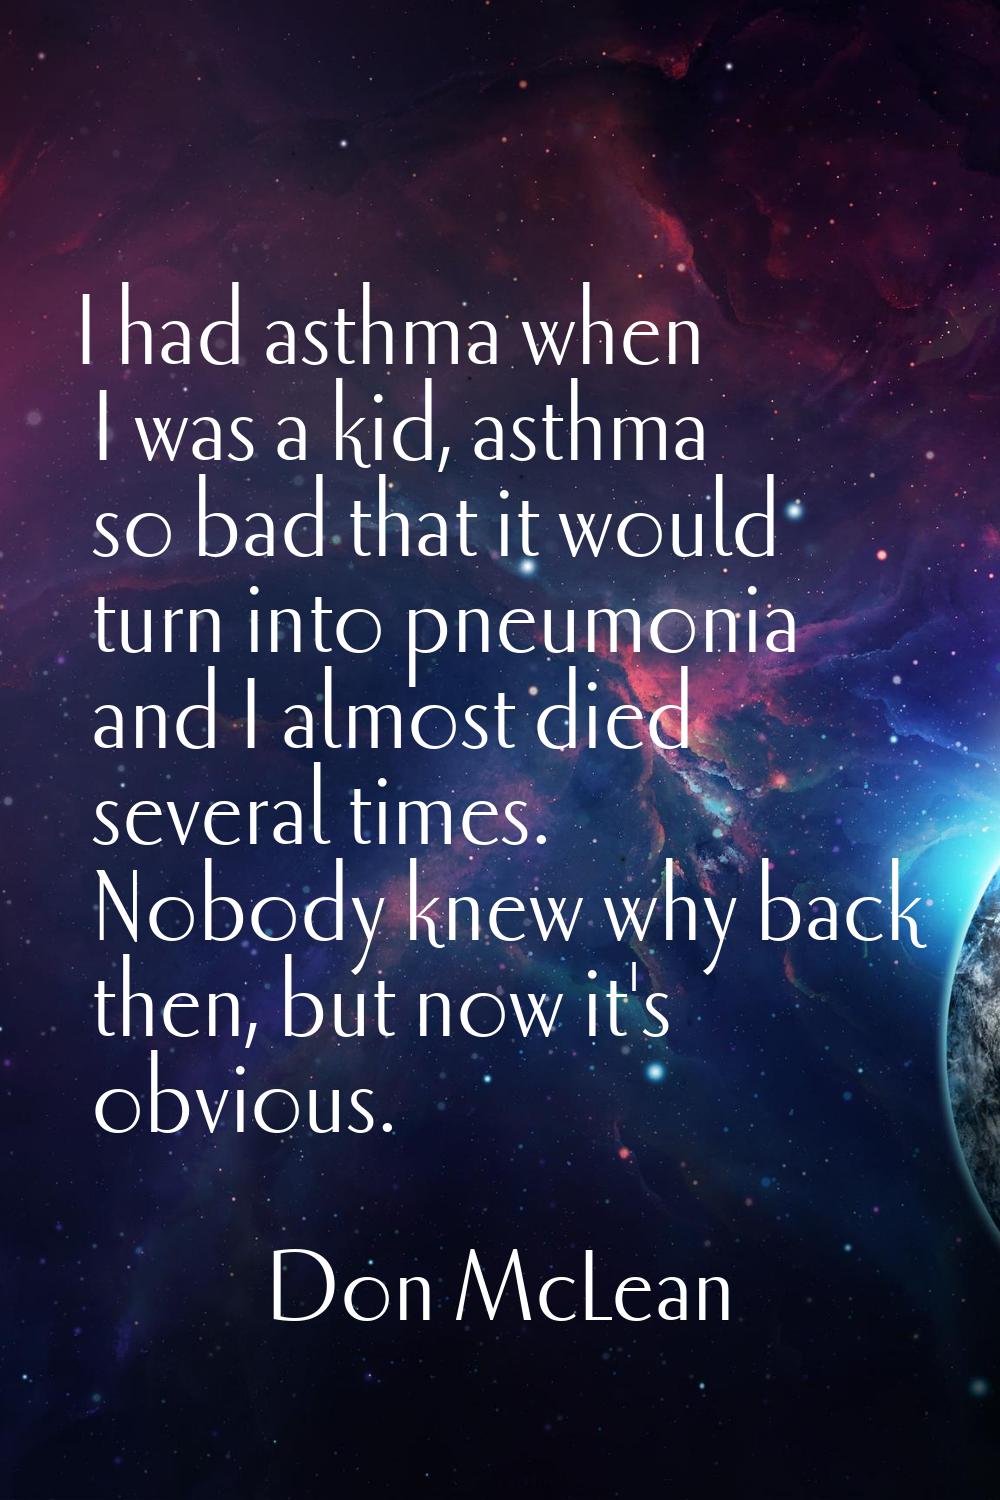 I had asthma when I was a kid, asthma so bad that it would turn into pneumonia and I almost died se